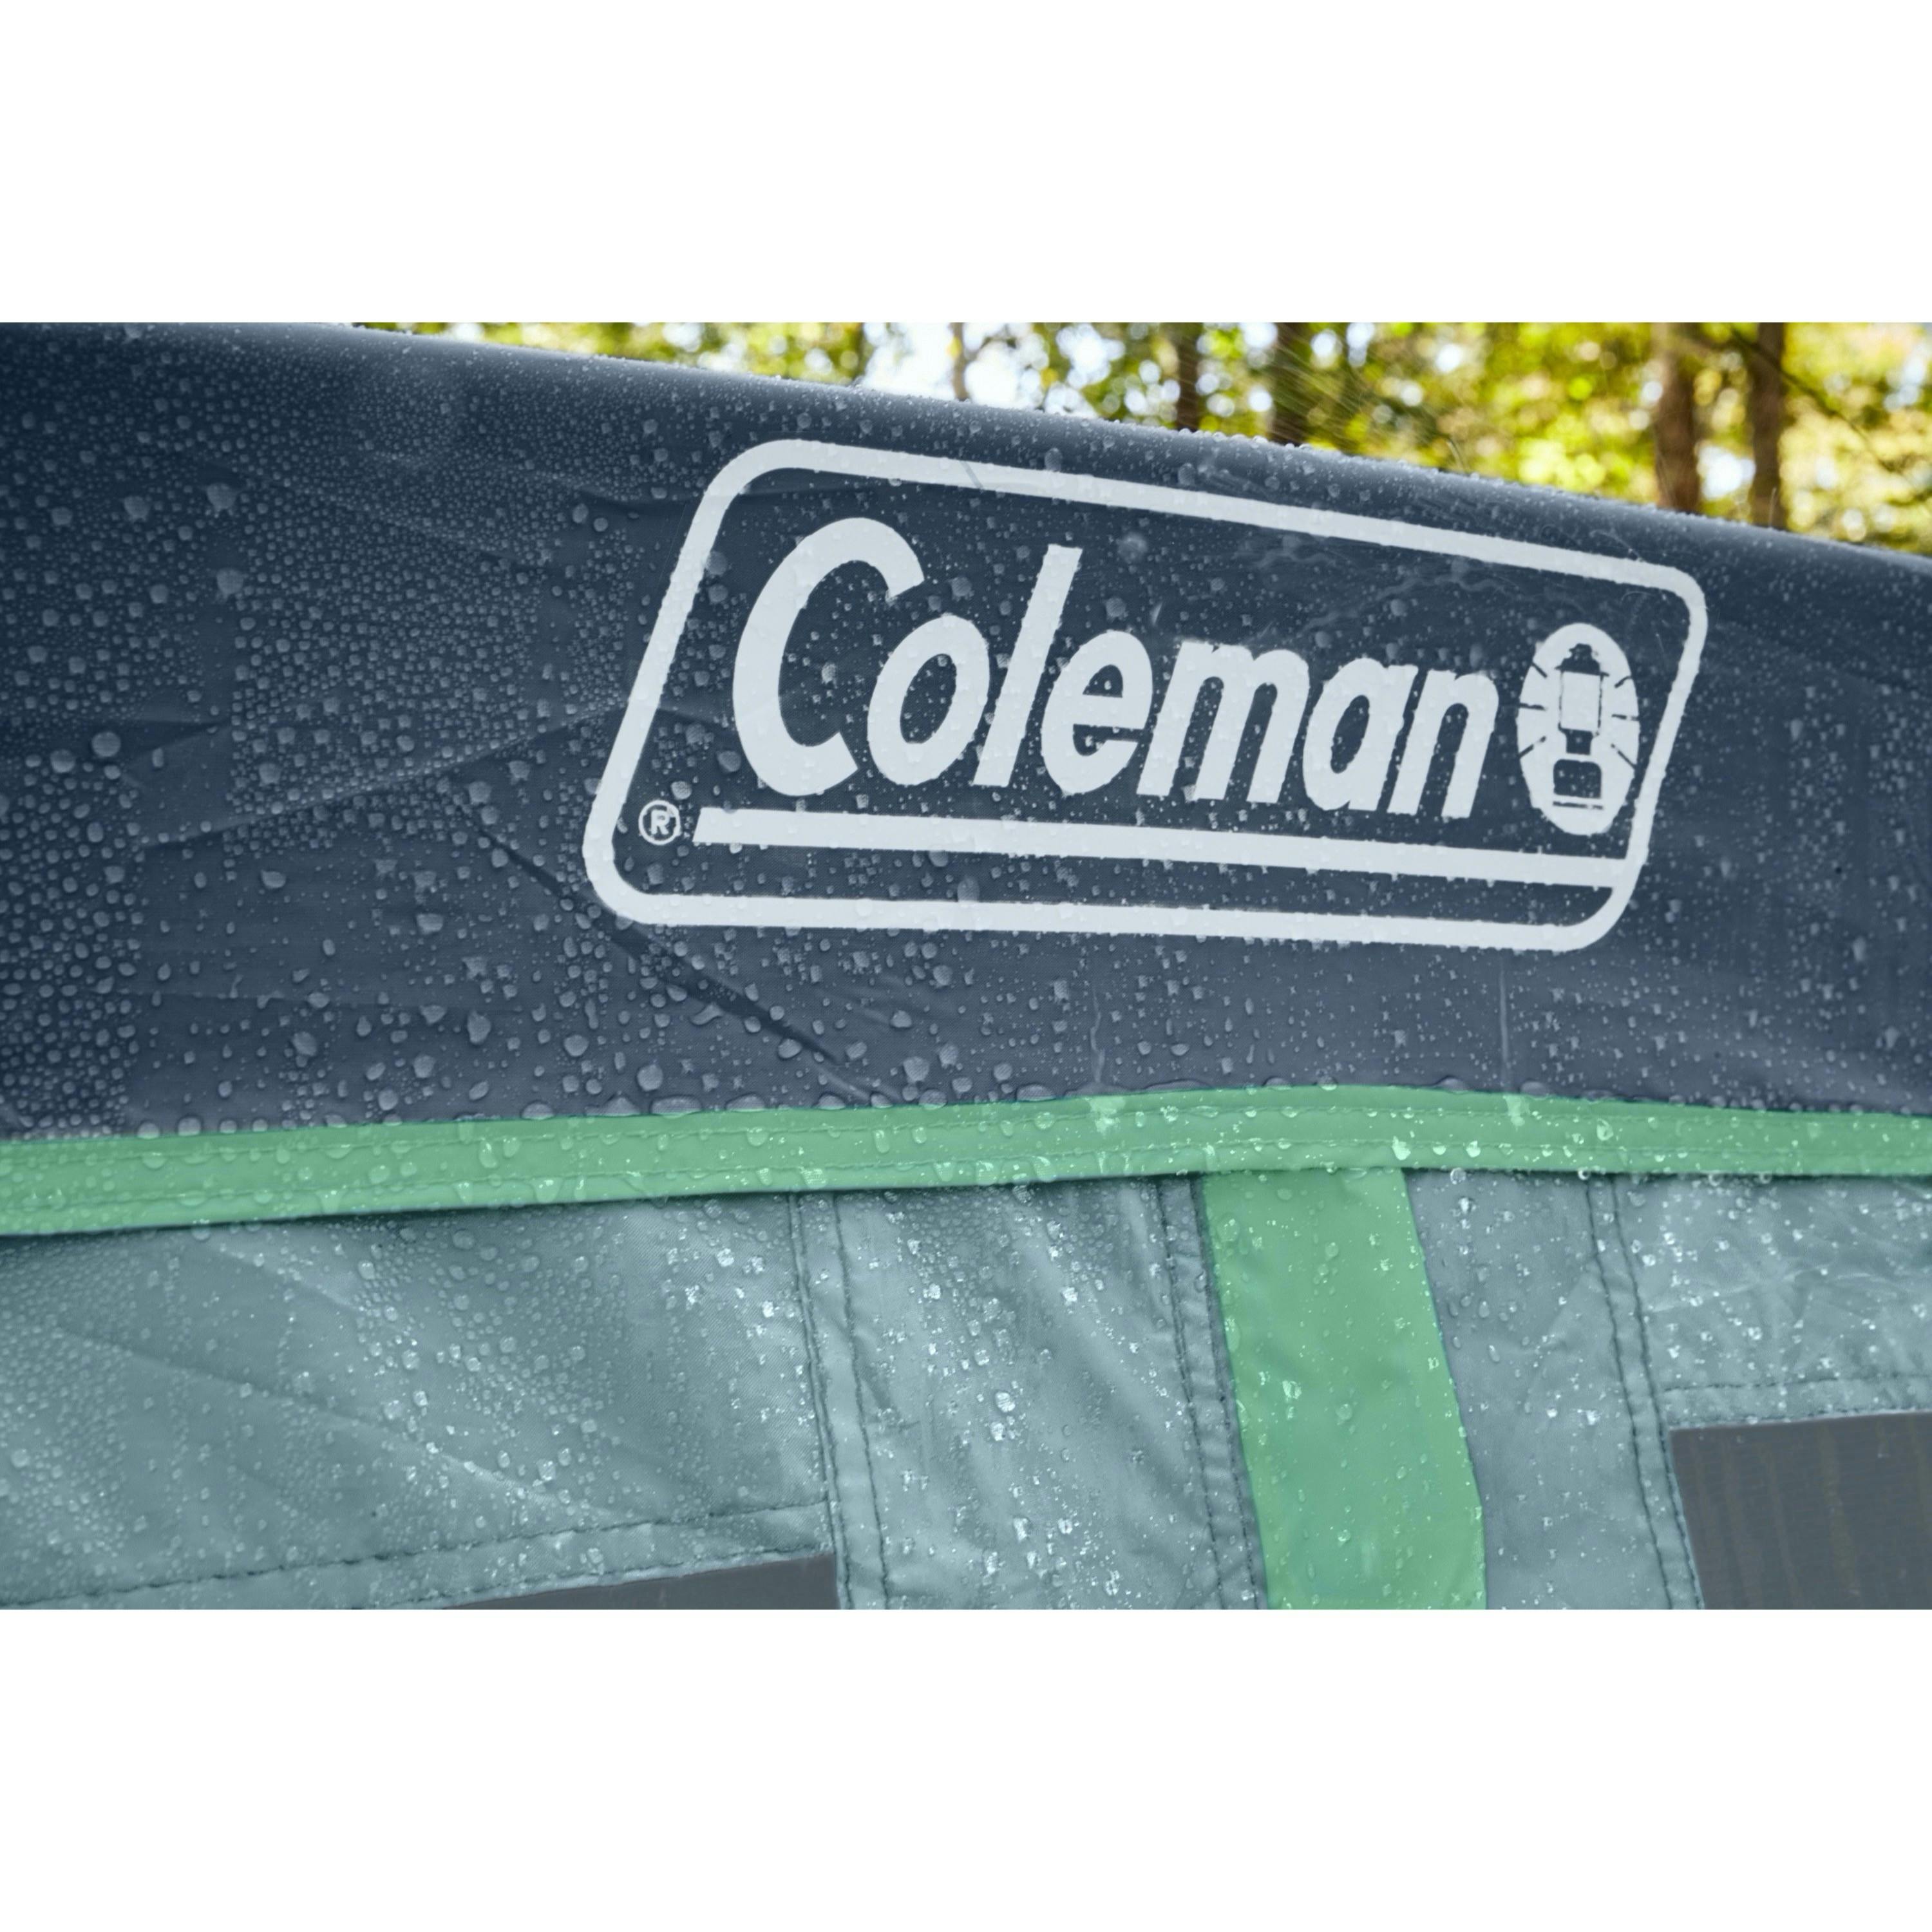 Coleman Skylodge Instant Camping Tent with Screen Room